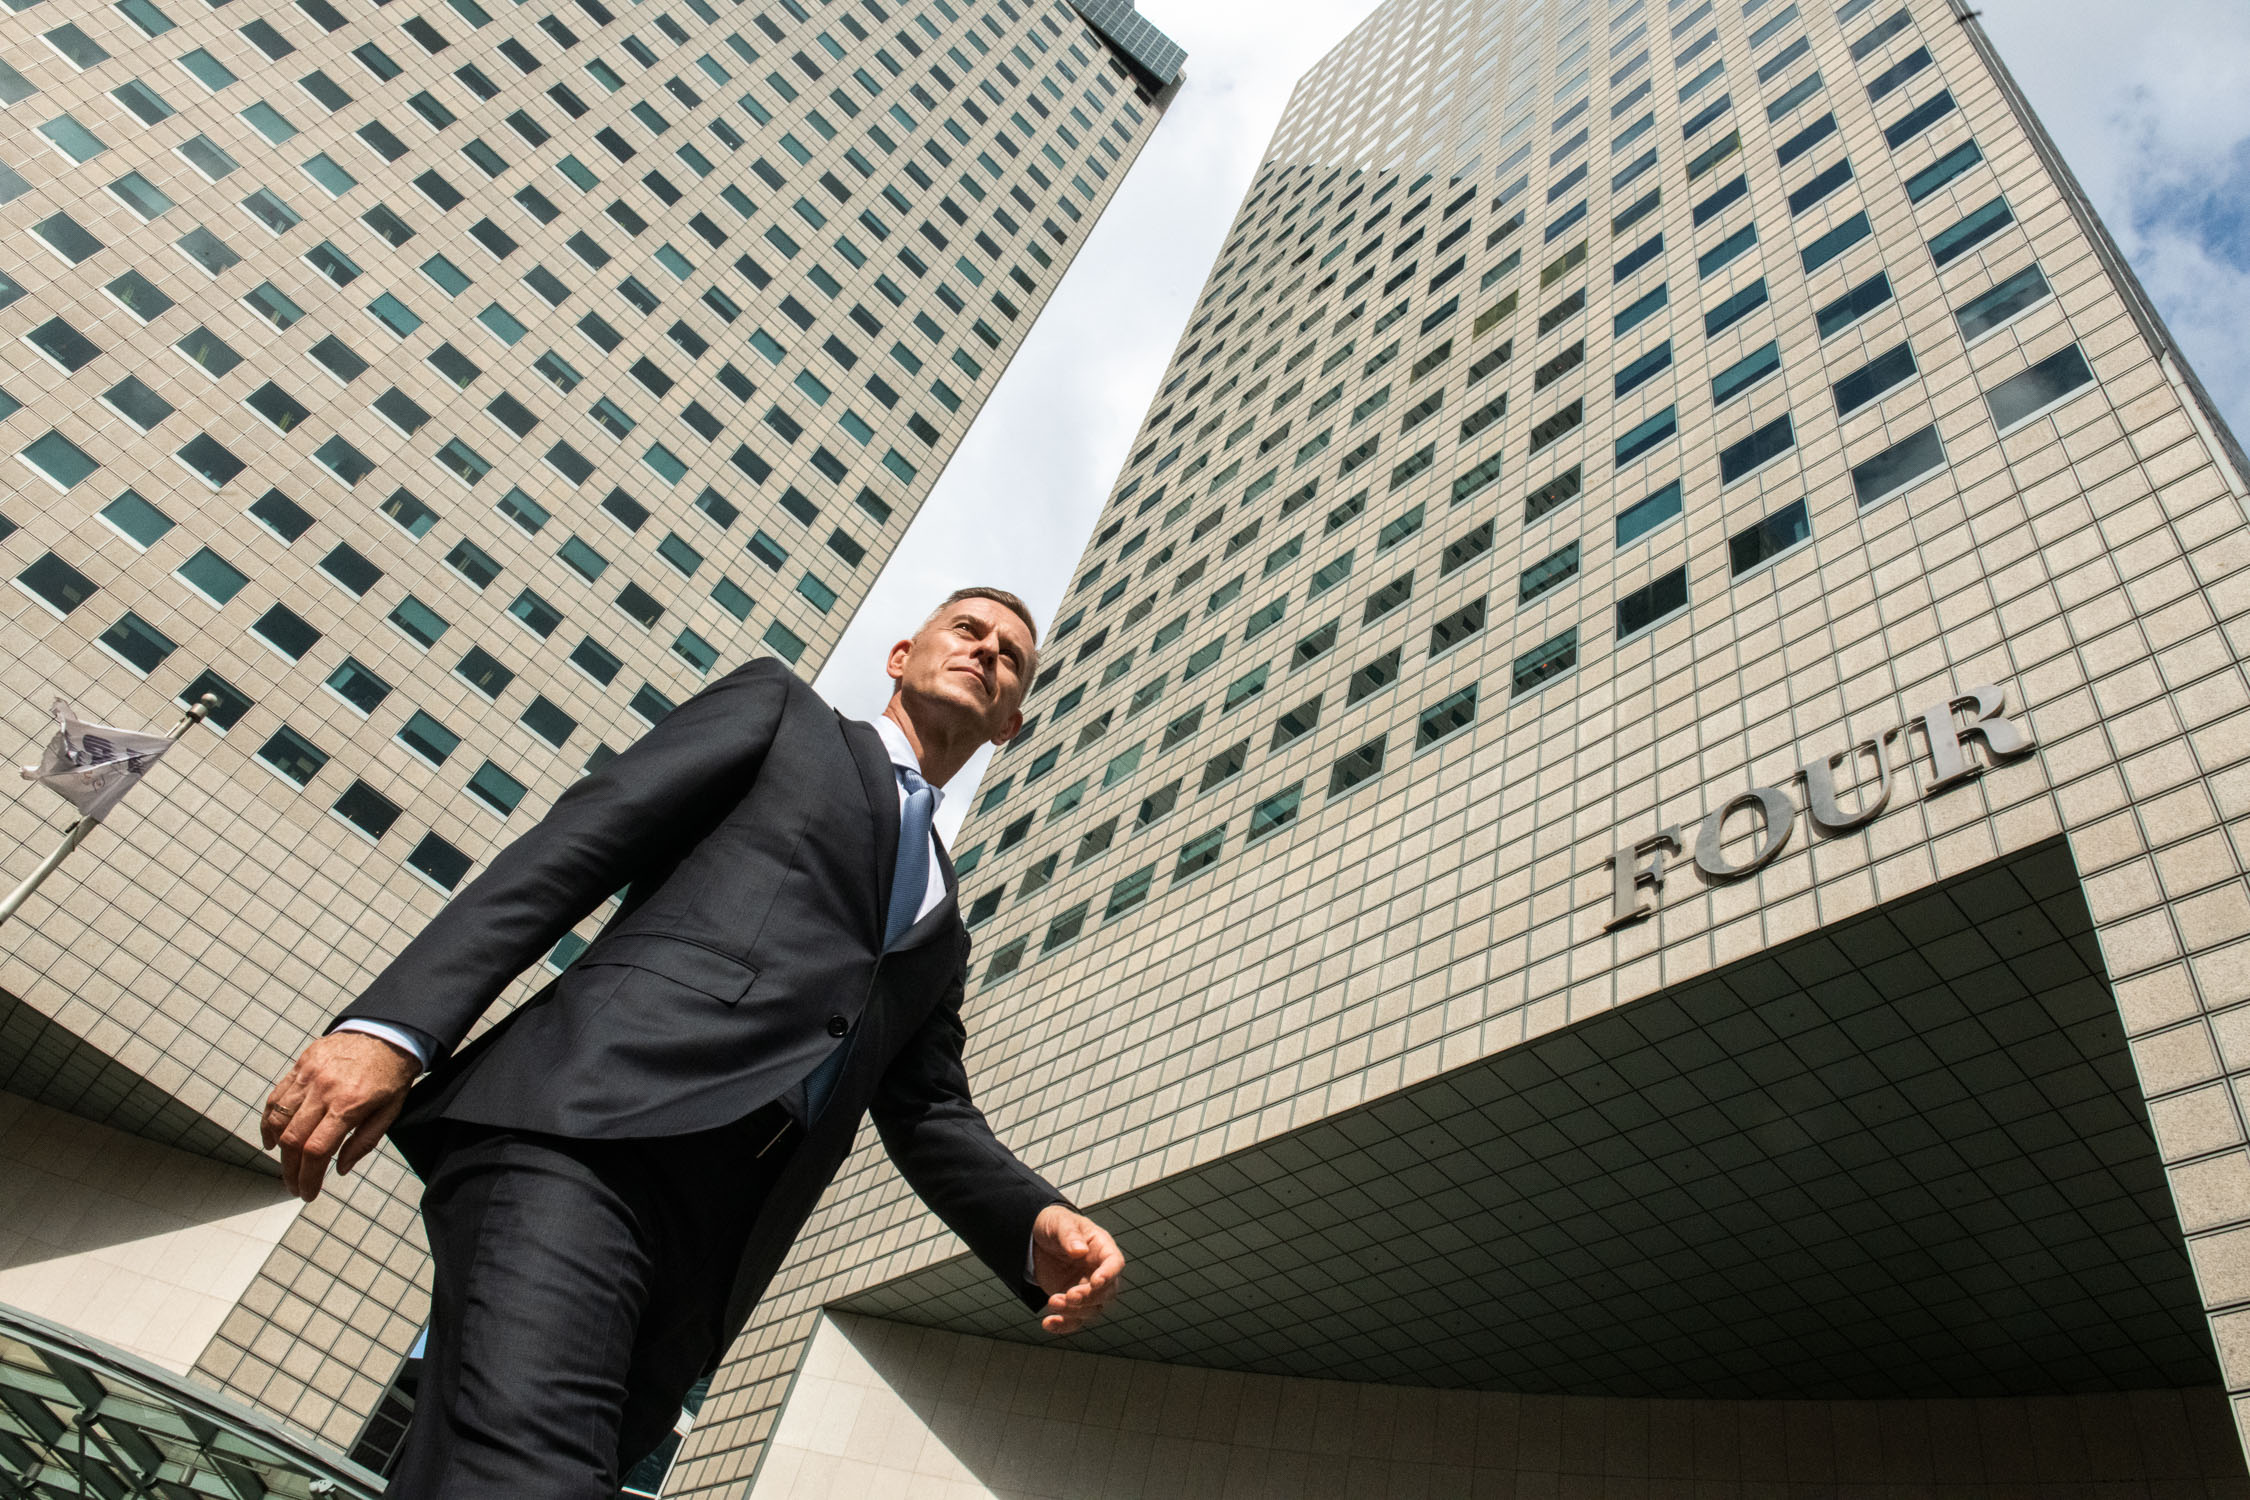 Man in a formal business suit walking outdoors against a backdrop of office buildings in Singapore